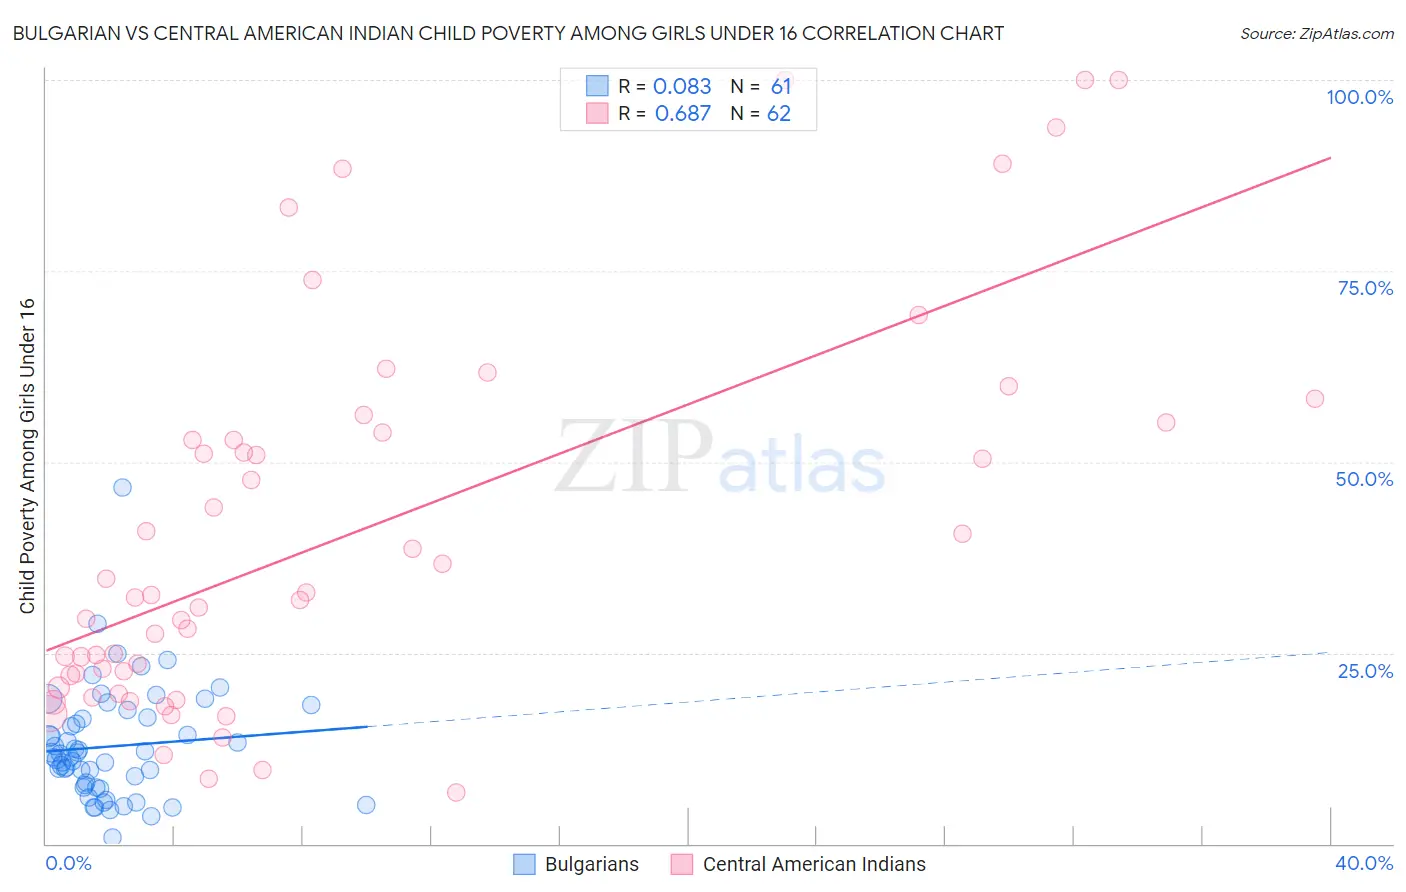 Bulgarian vs Central American Indian Child Poverty Among Girls Under 16